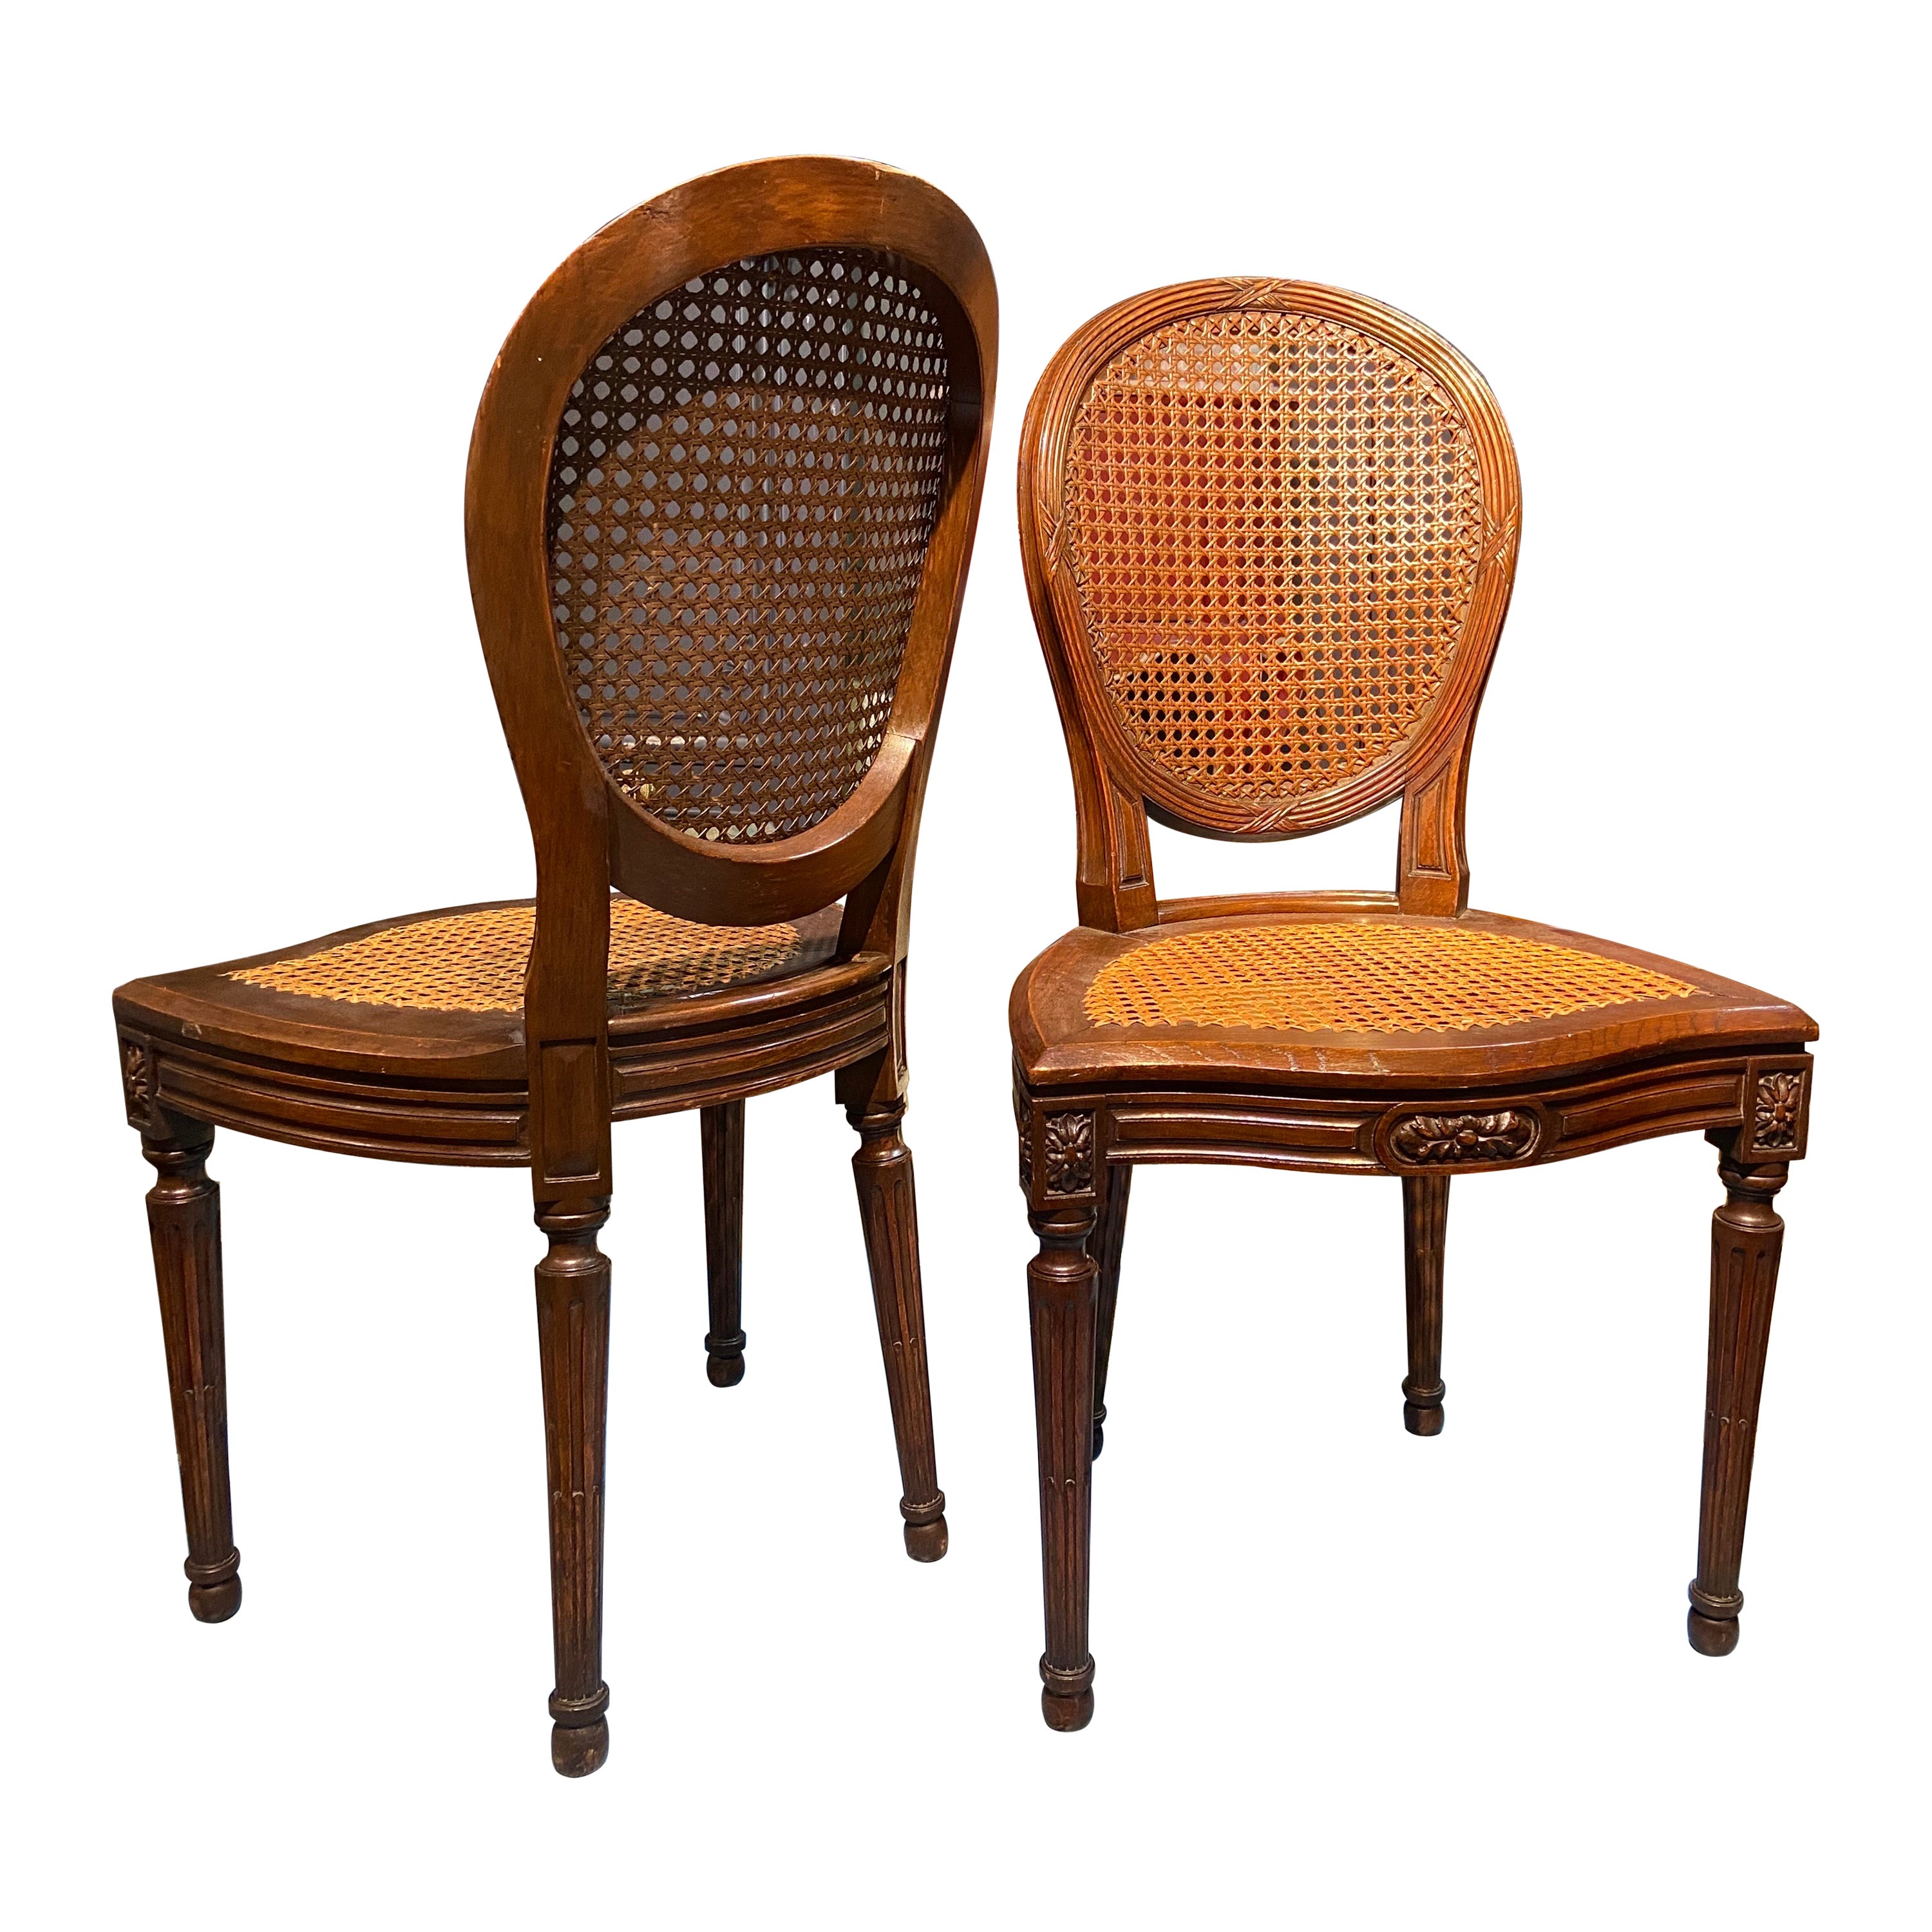 19th Century French Oval Hand Carved Walnut Cane Dining Chairs Louis XVI Style For Sale